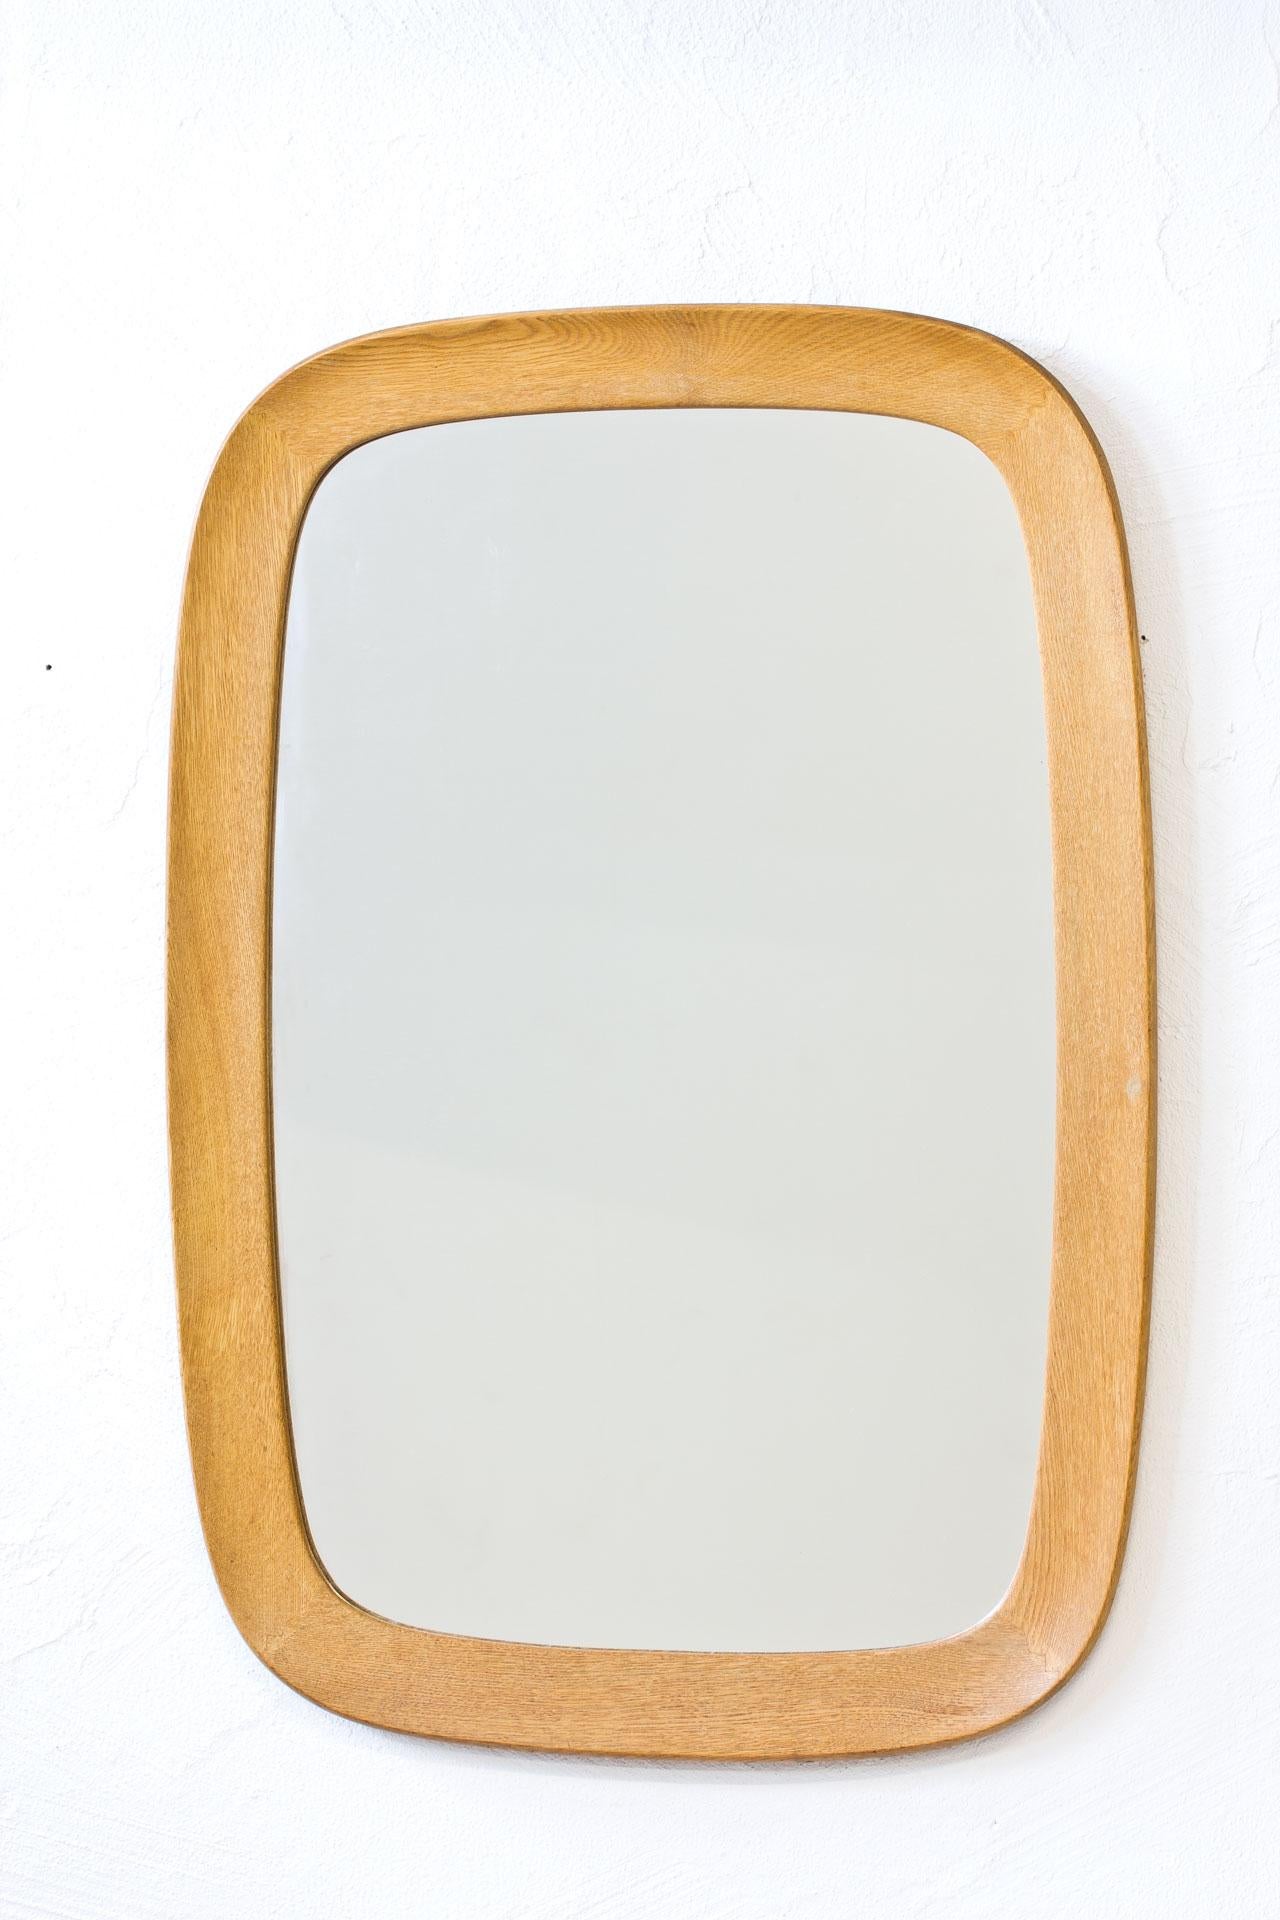 Oval shaped oak wall mirror manufactured by Fröseke AB Nybrofabriken during the
1950s in Sweden. Oak frame with nice curves and joinery.